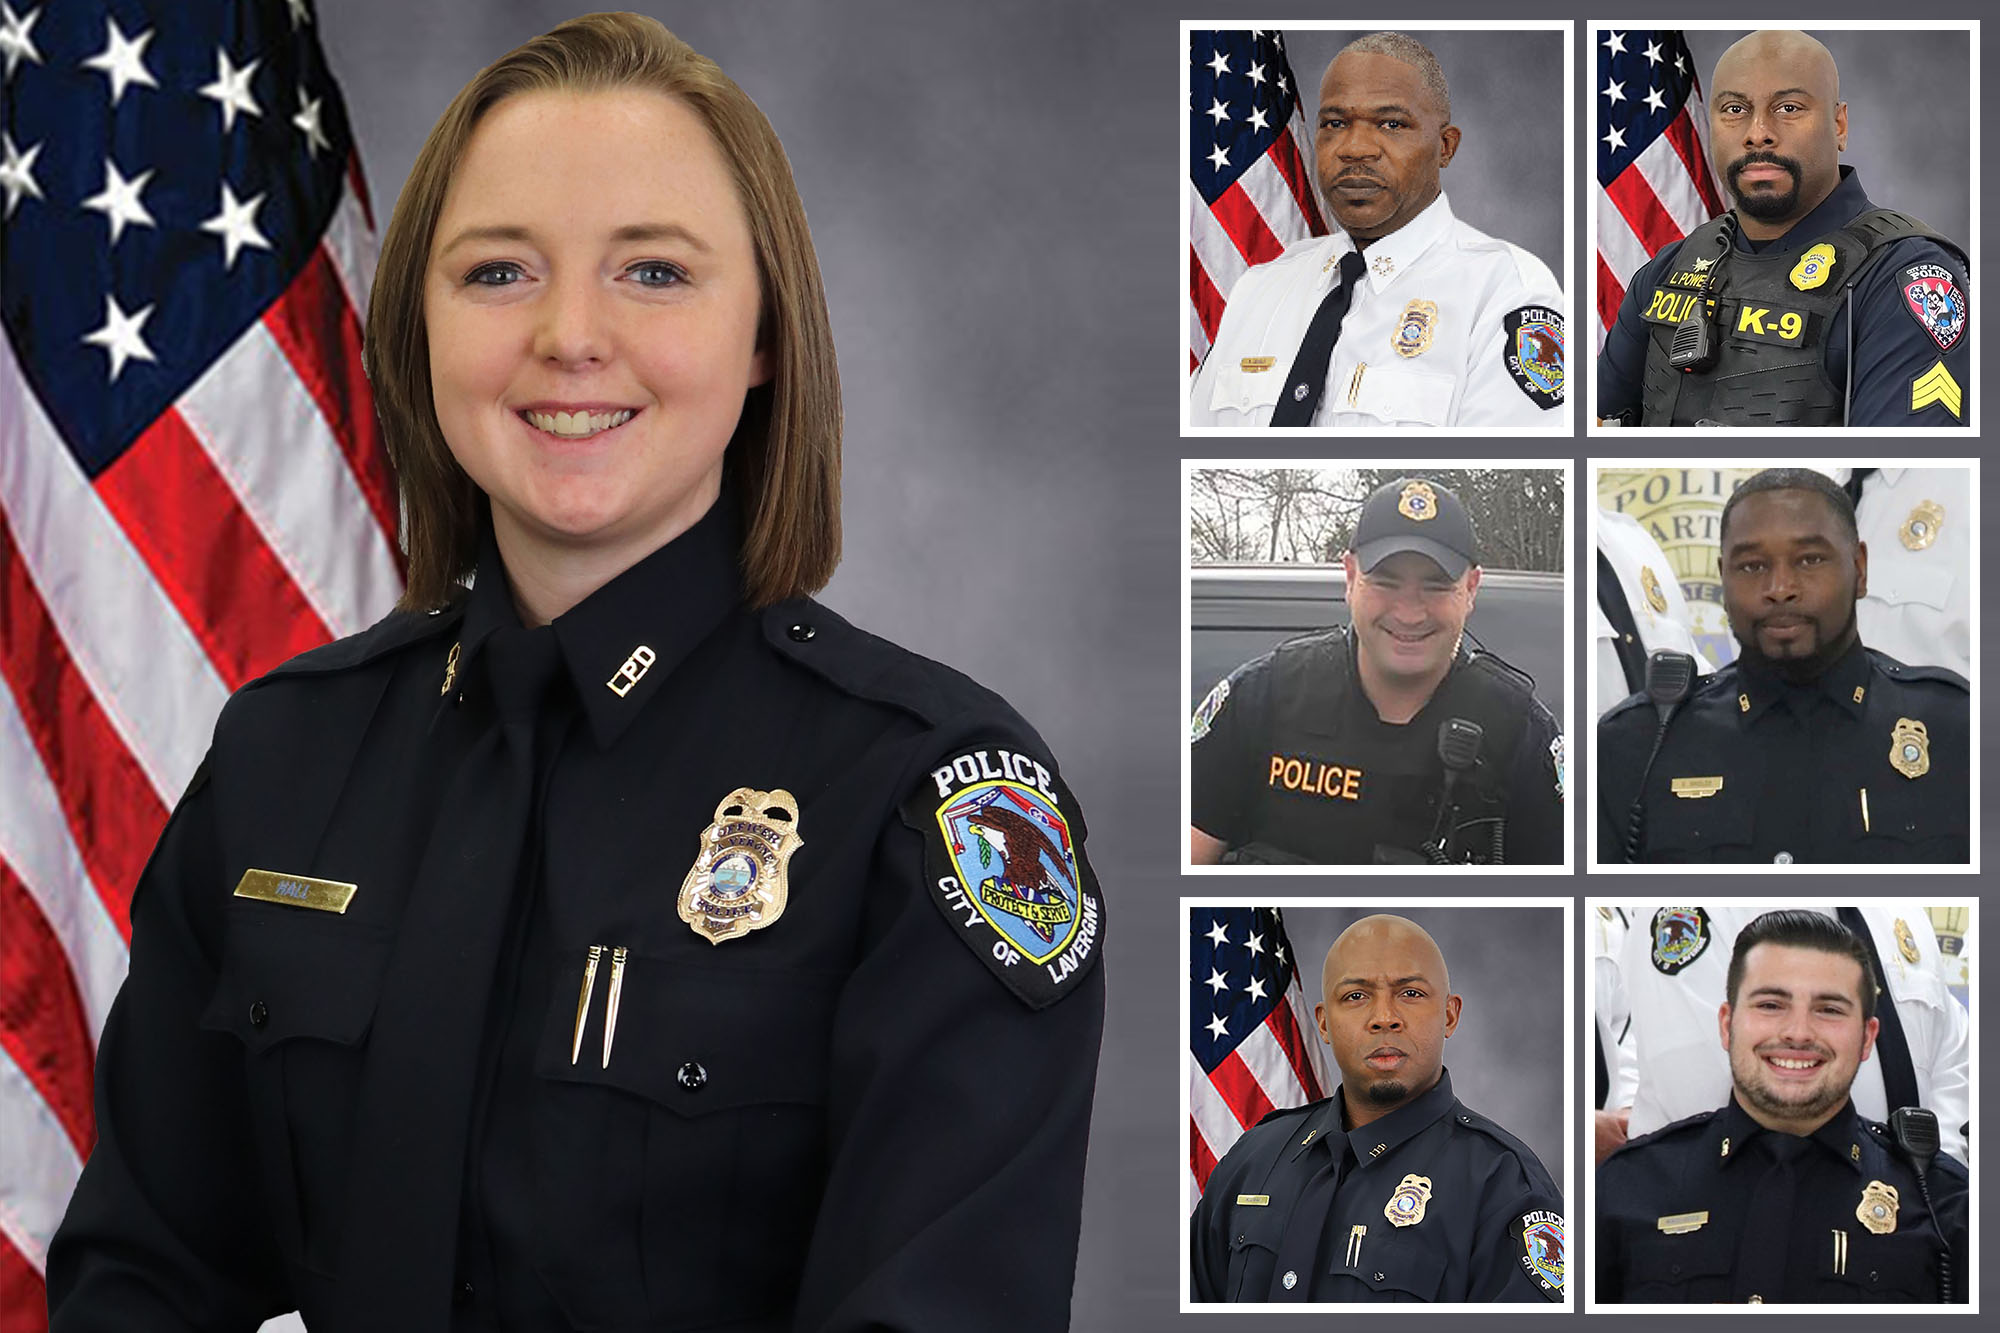 Update: Female officer fired for having s3x with multiple colleagues to get $500k payday after suing Tennessee city claiming that she was groomed by 'predator' superiors